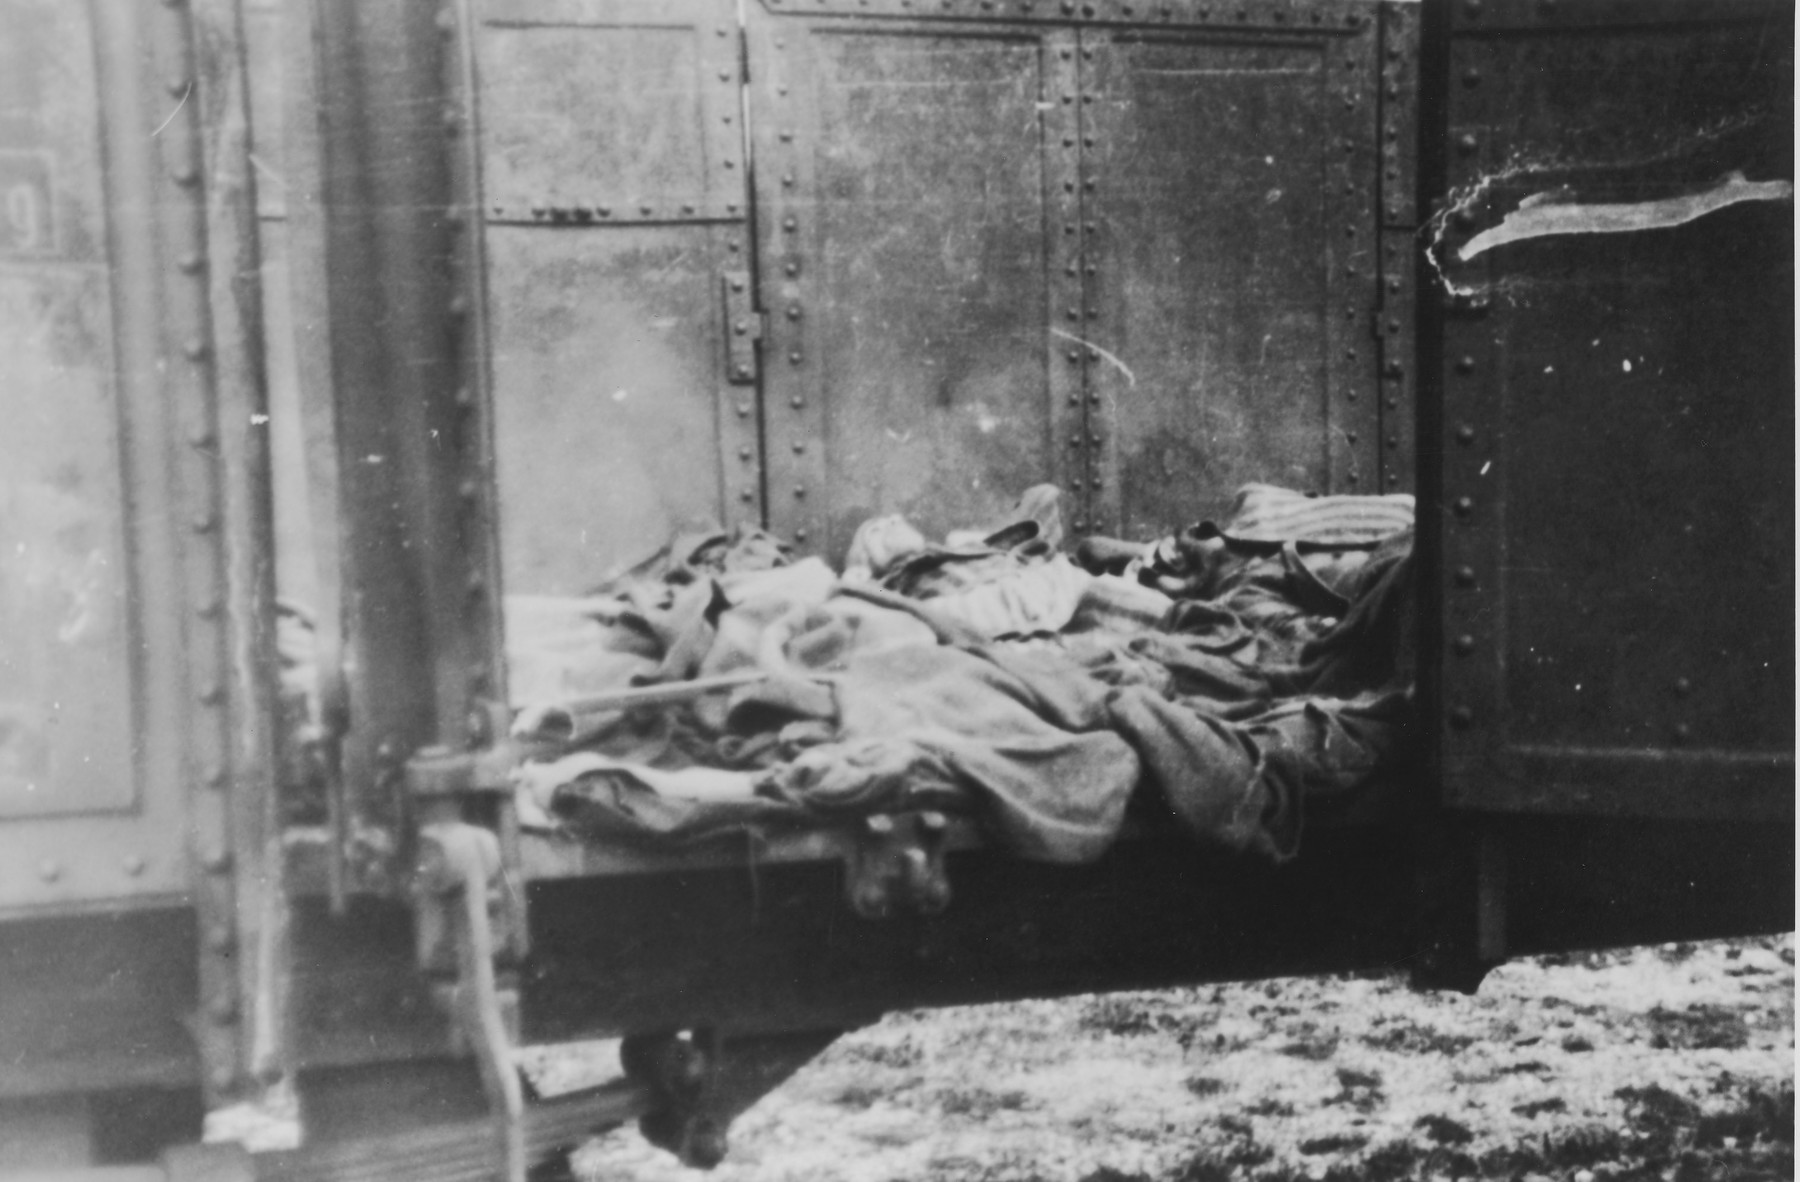 Corpses lie in one of the open railcars of the Dachau death train.